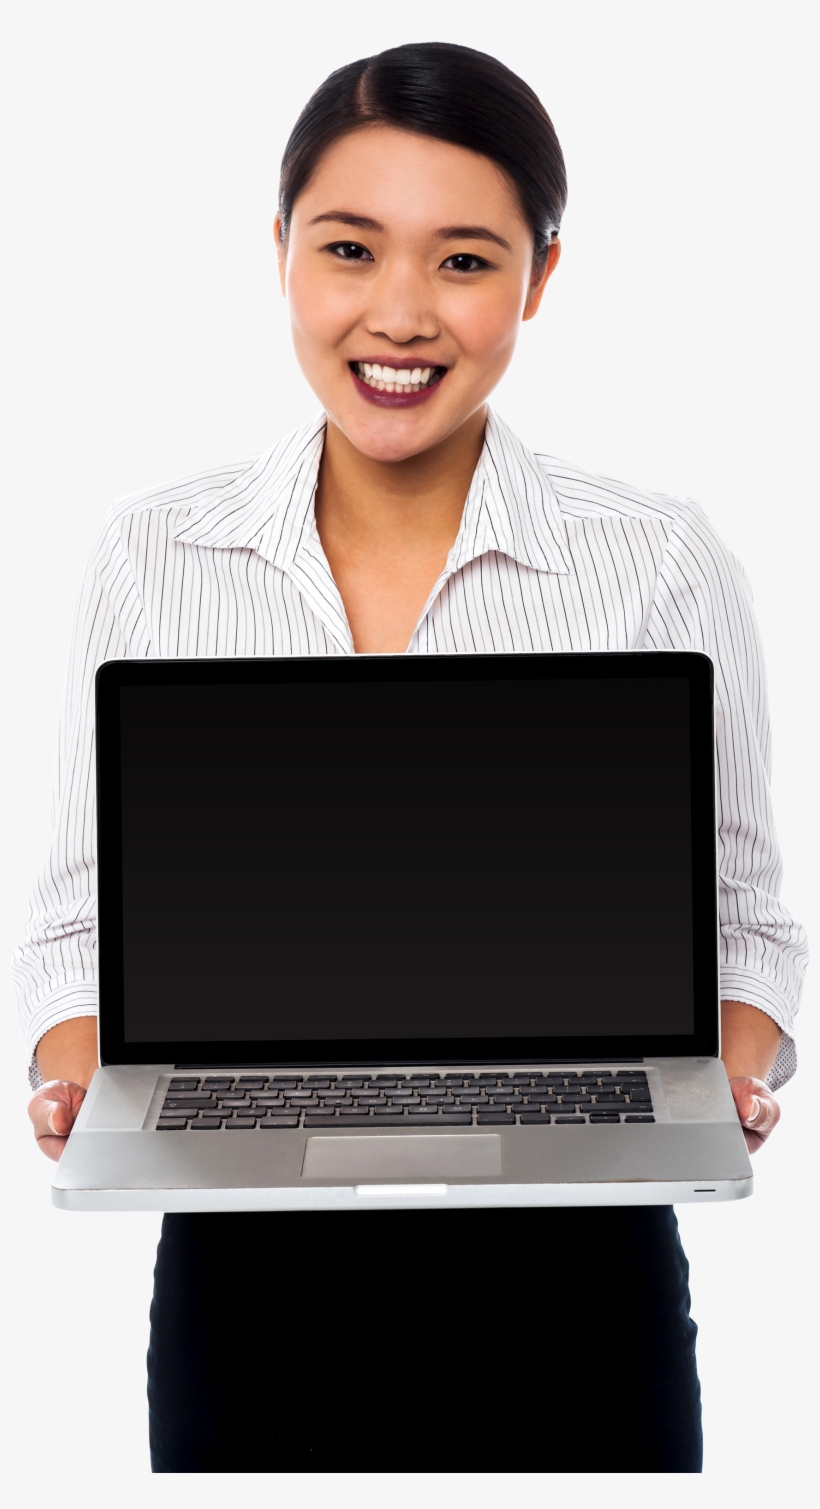 Girl With Laptop Png Image - Girls With Laptop Png, transparent png #2585233